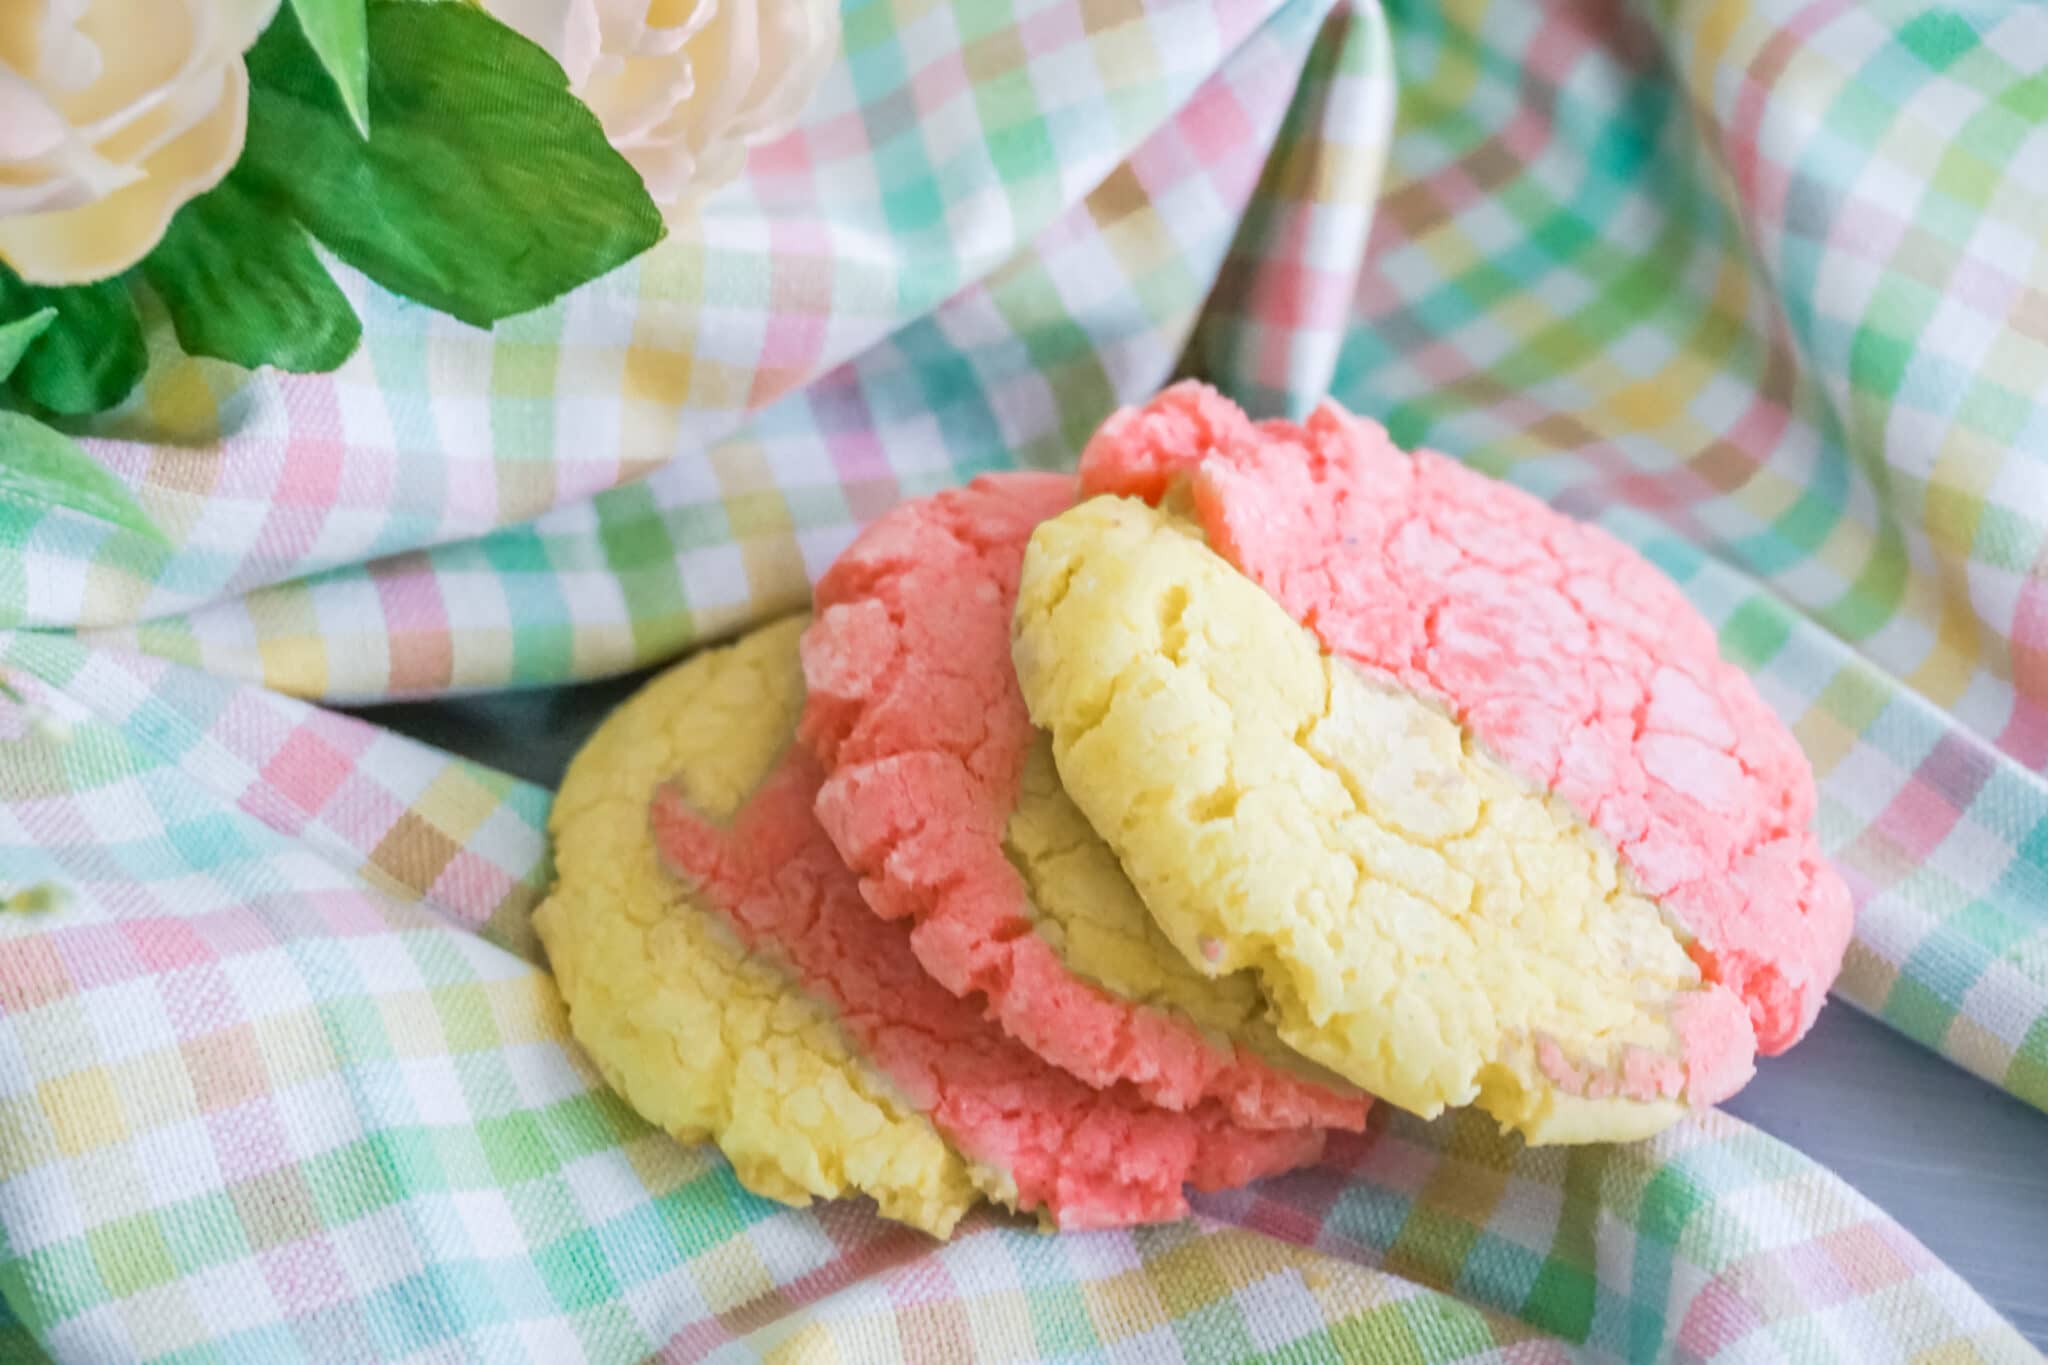 Strawberry Lemonade Crinkle Cookies on pastel colored plaid fabric next to a rose